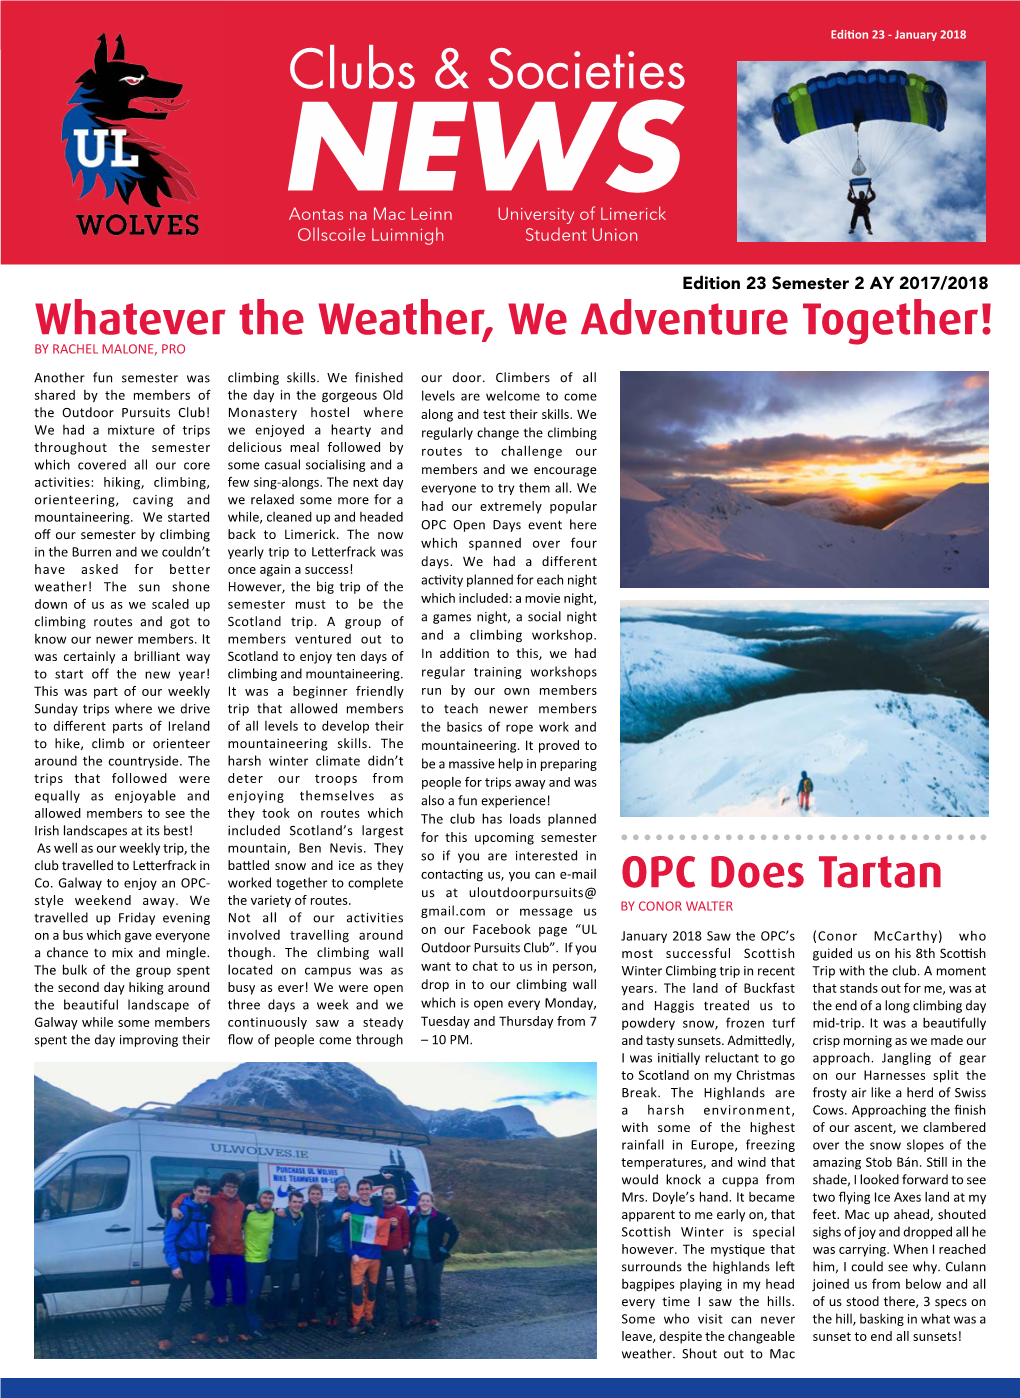 Whatever the Weather, We Adventure Together! OPC Does Tartan